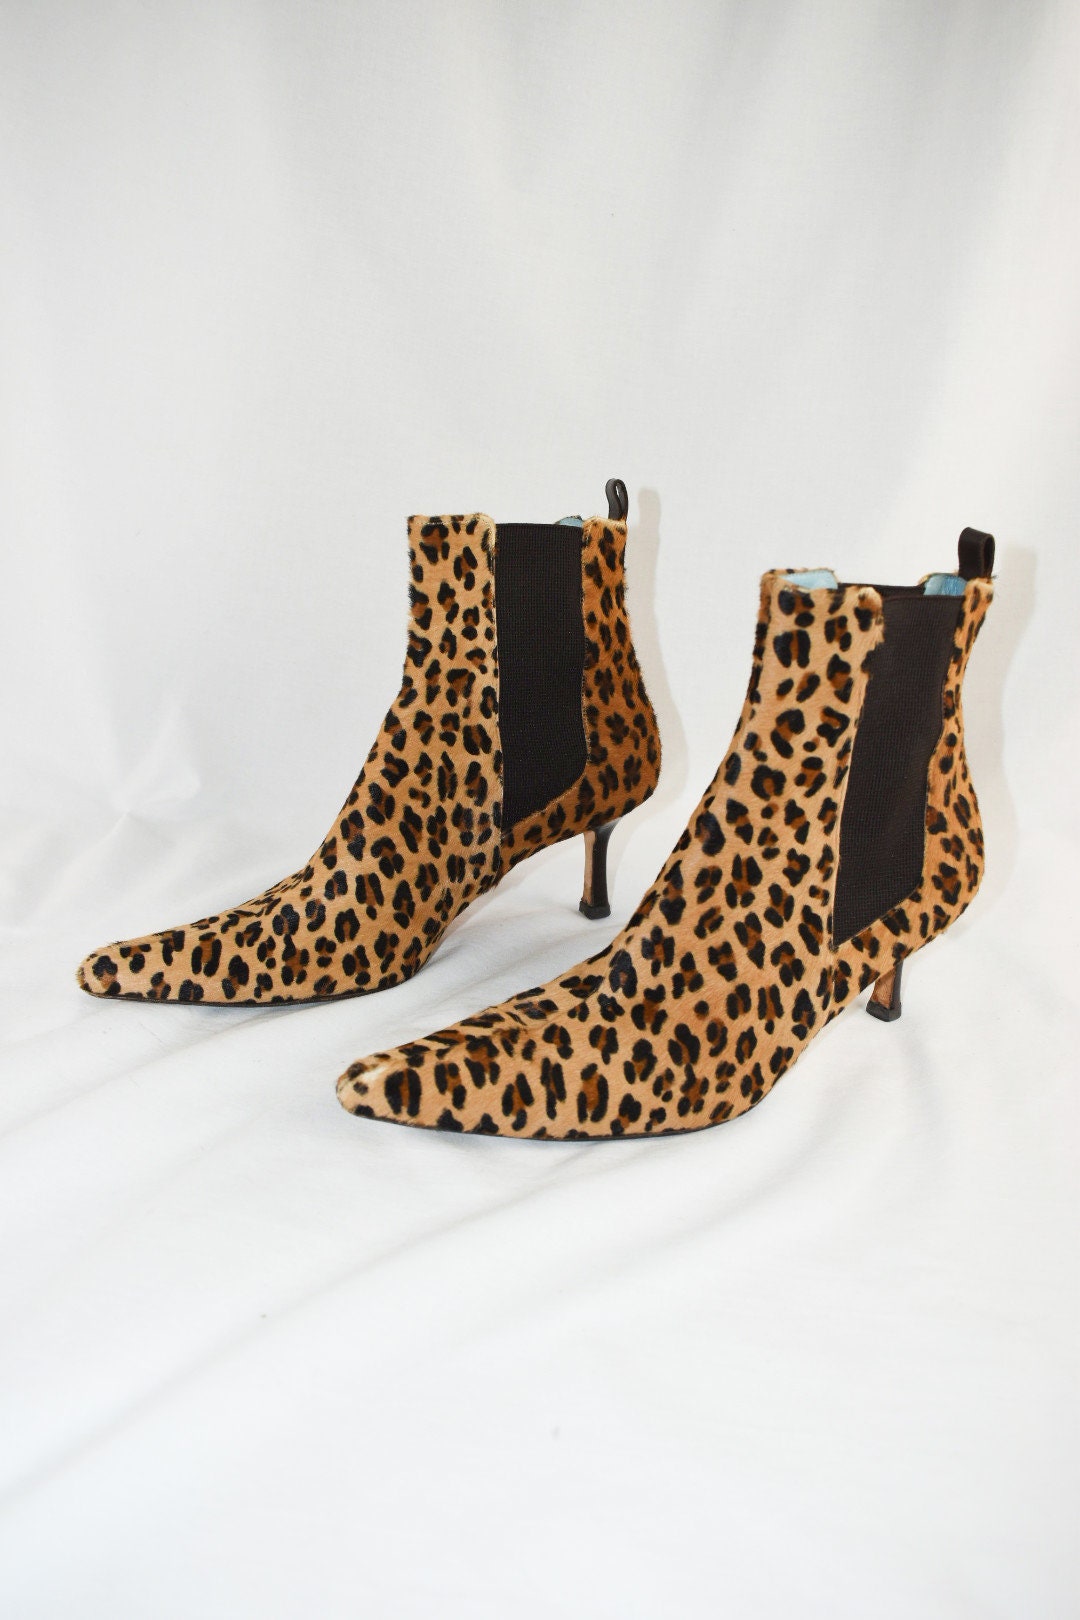 Y2K Leopard Hair Ankle Boots / 39 8.5 - Etsy